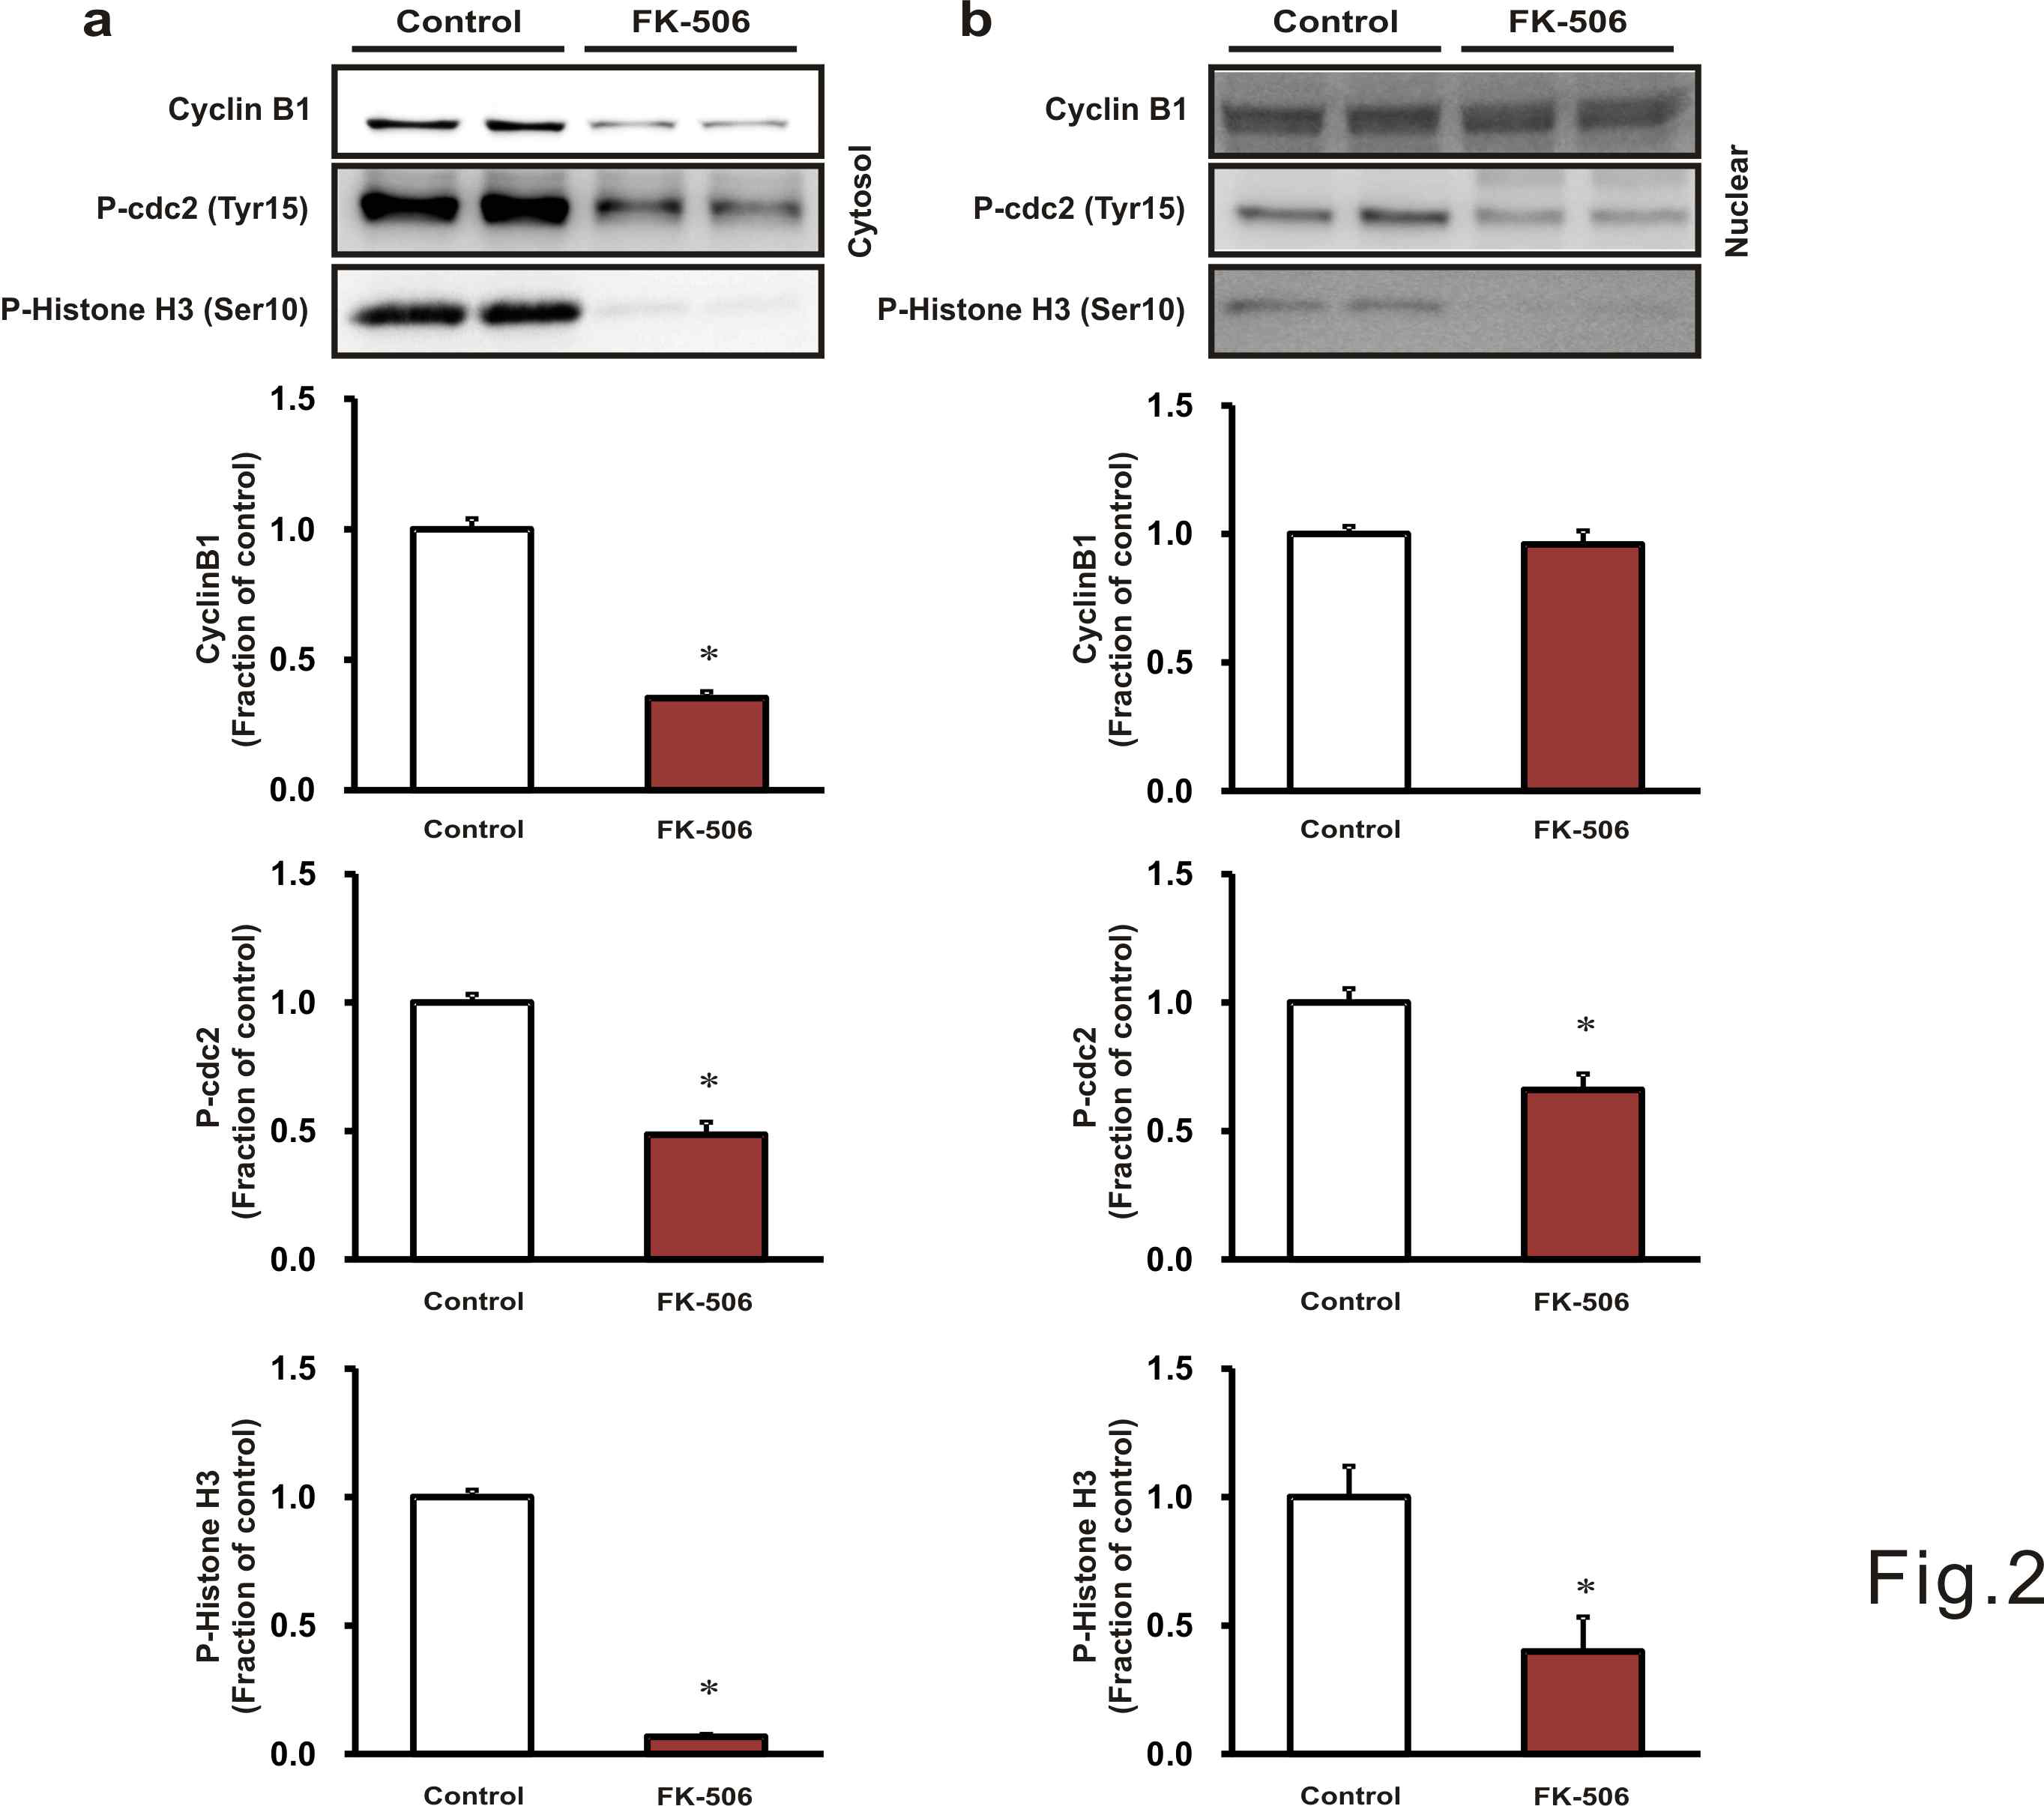 Treatment of tacrolimus decreased the protein expression of cyclin B1, phospho-cdc2 and phospho-Histone H3 in cytosol and nuclear fraction compared with control, indicating that cells arrested at G0/G1 phase